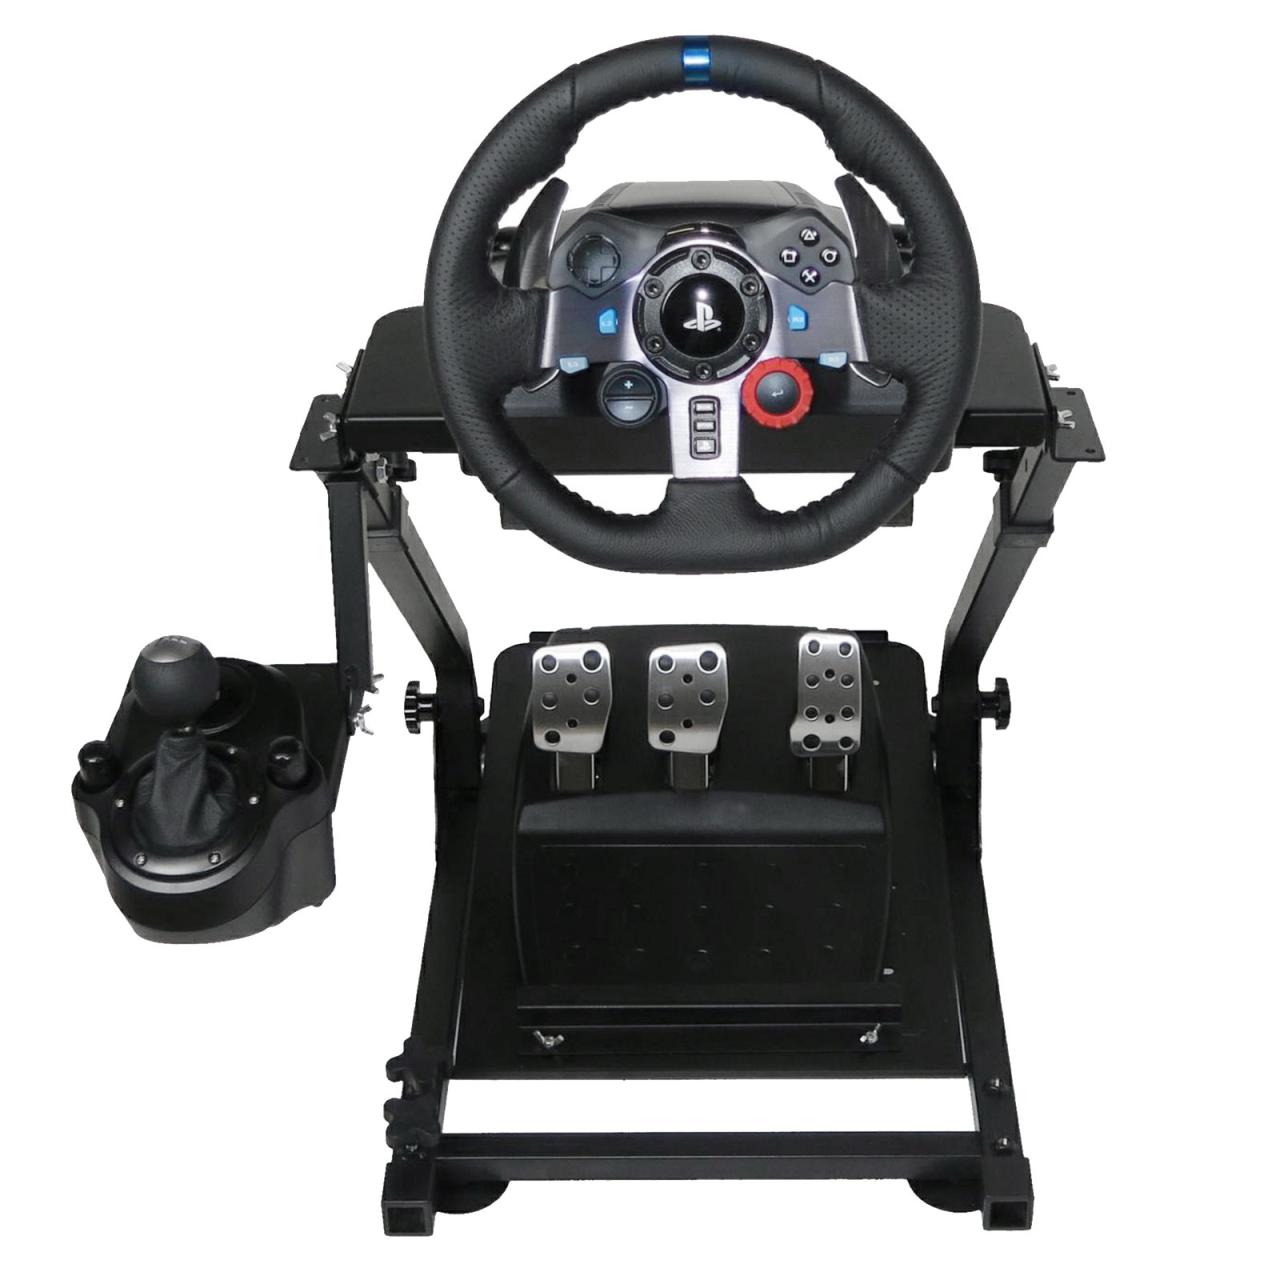 Steering logitech g29 pedals g920 gaming jinlantrade shifter ps5 t500rs thrustmaster wheels